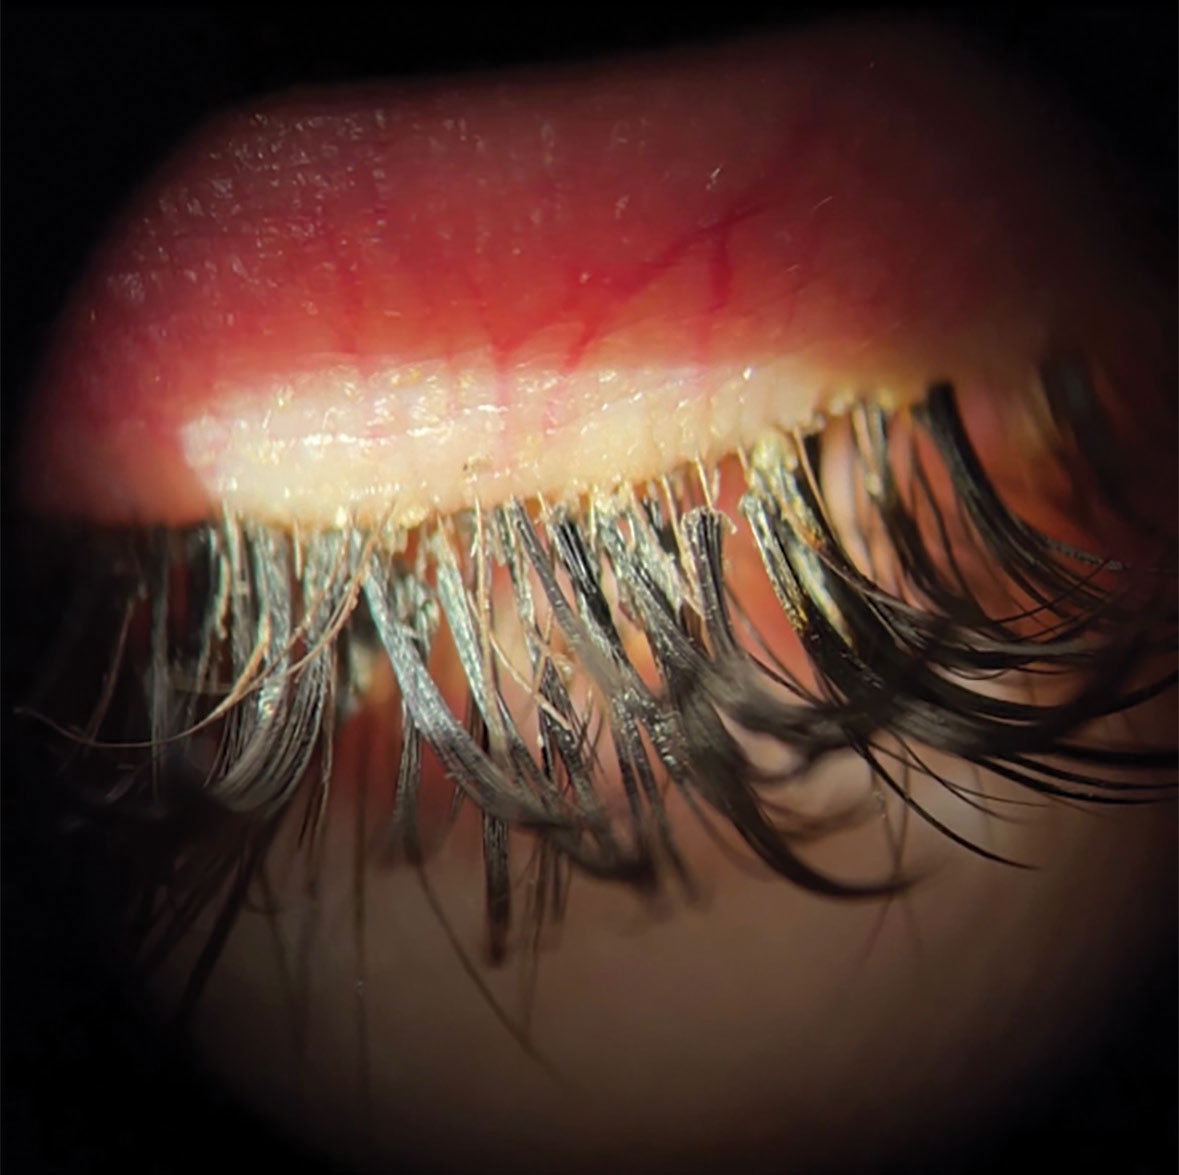 Patient with eyelash extensions and blepharitis.